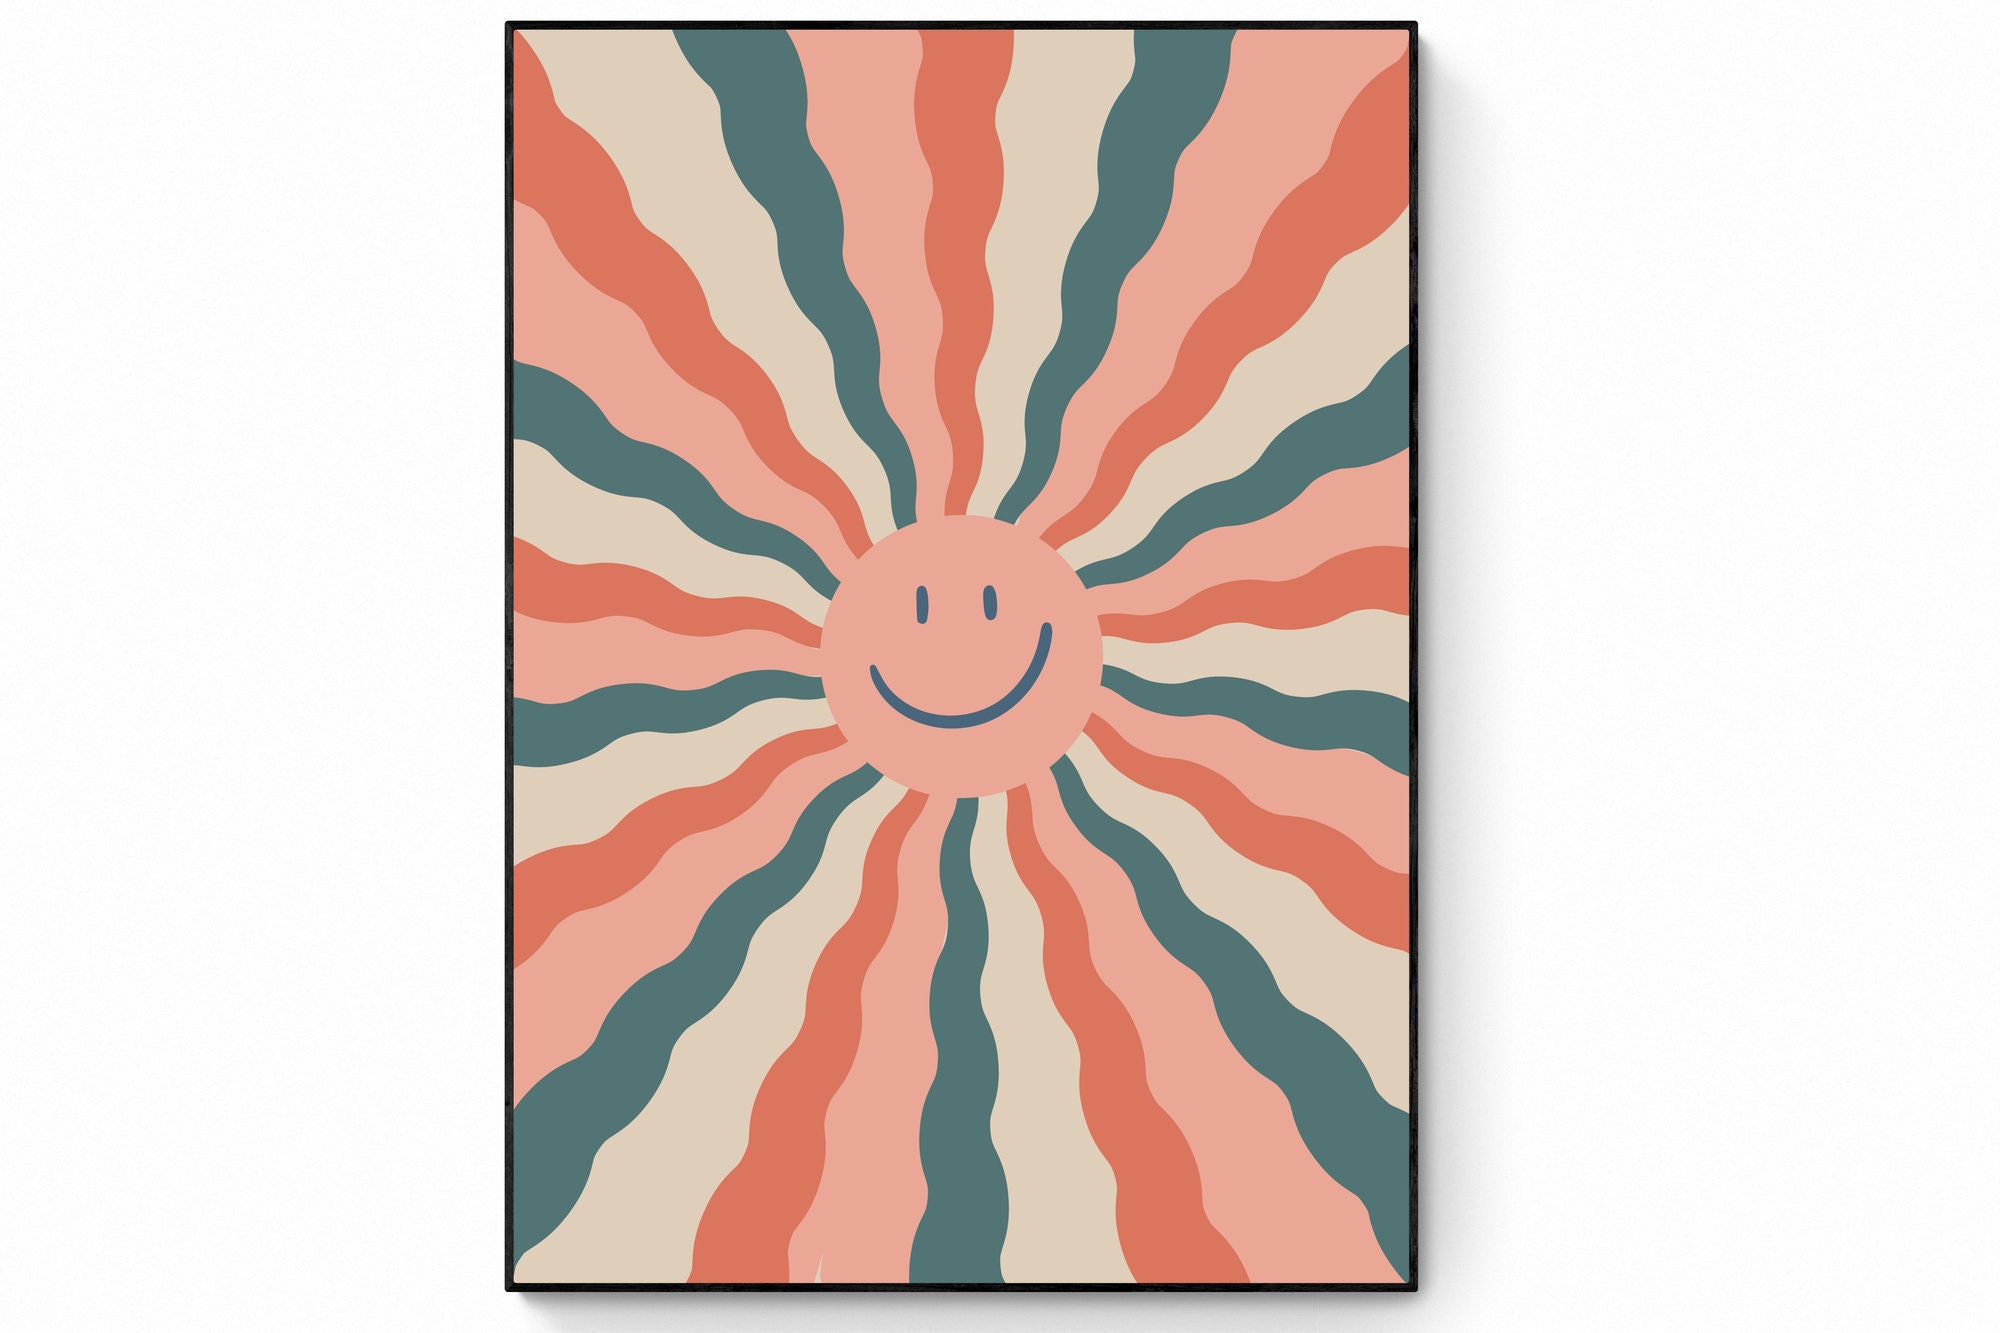 Smiling Sun Iron On Embroidered Patch Applique